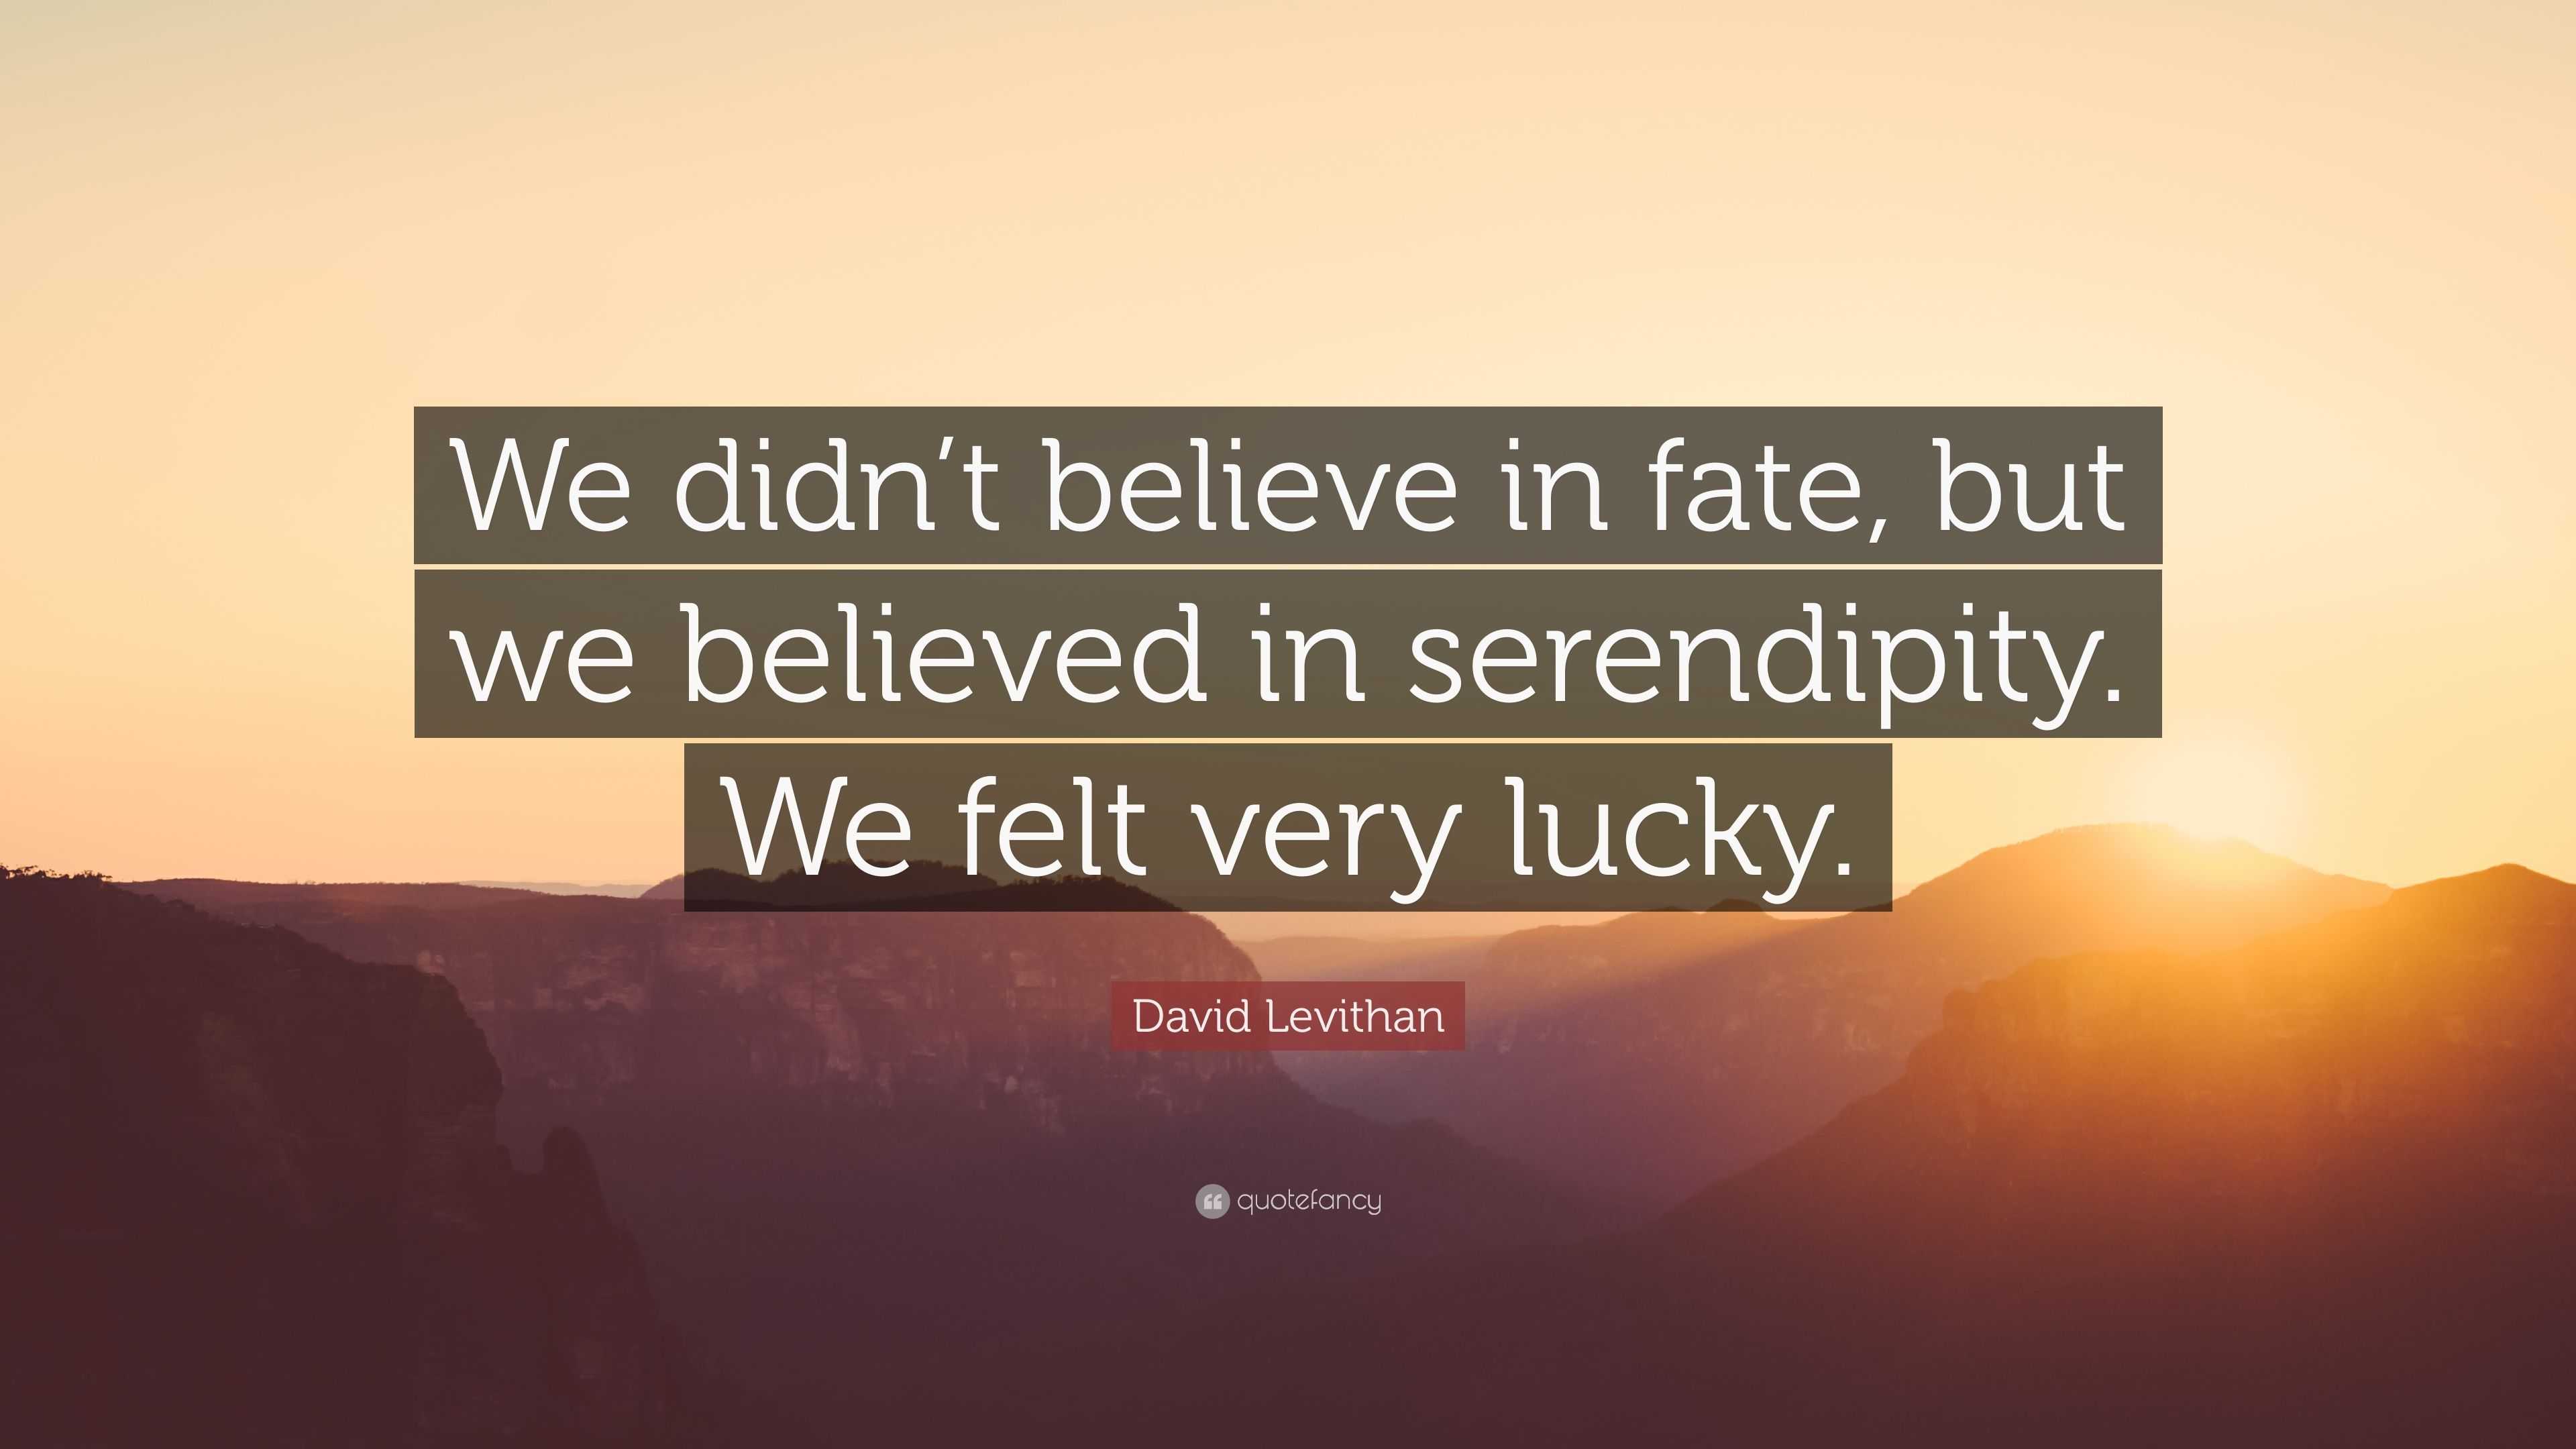 David Levithan Quote: “I am a firm believer in serendipity- all